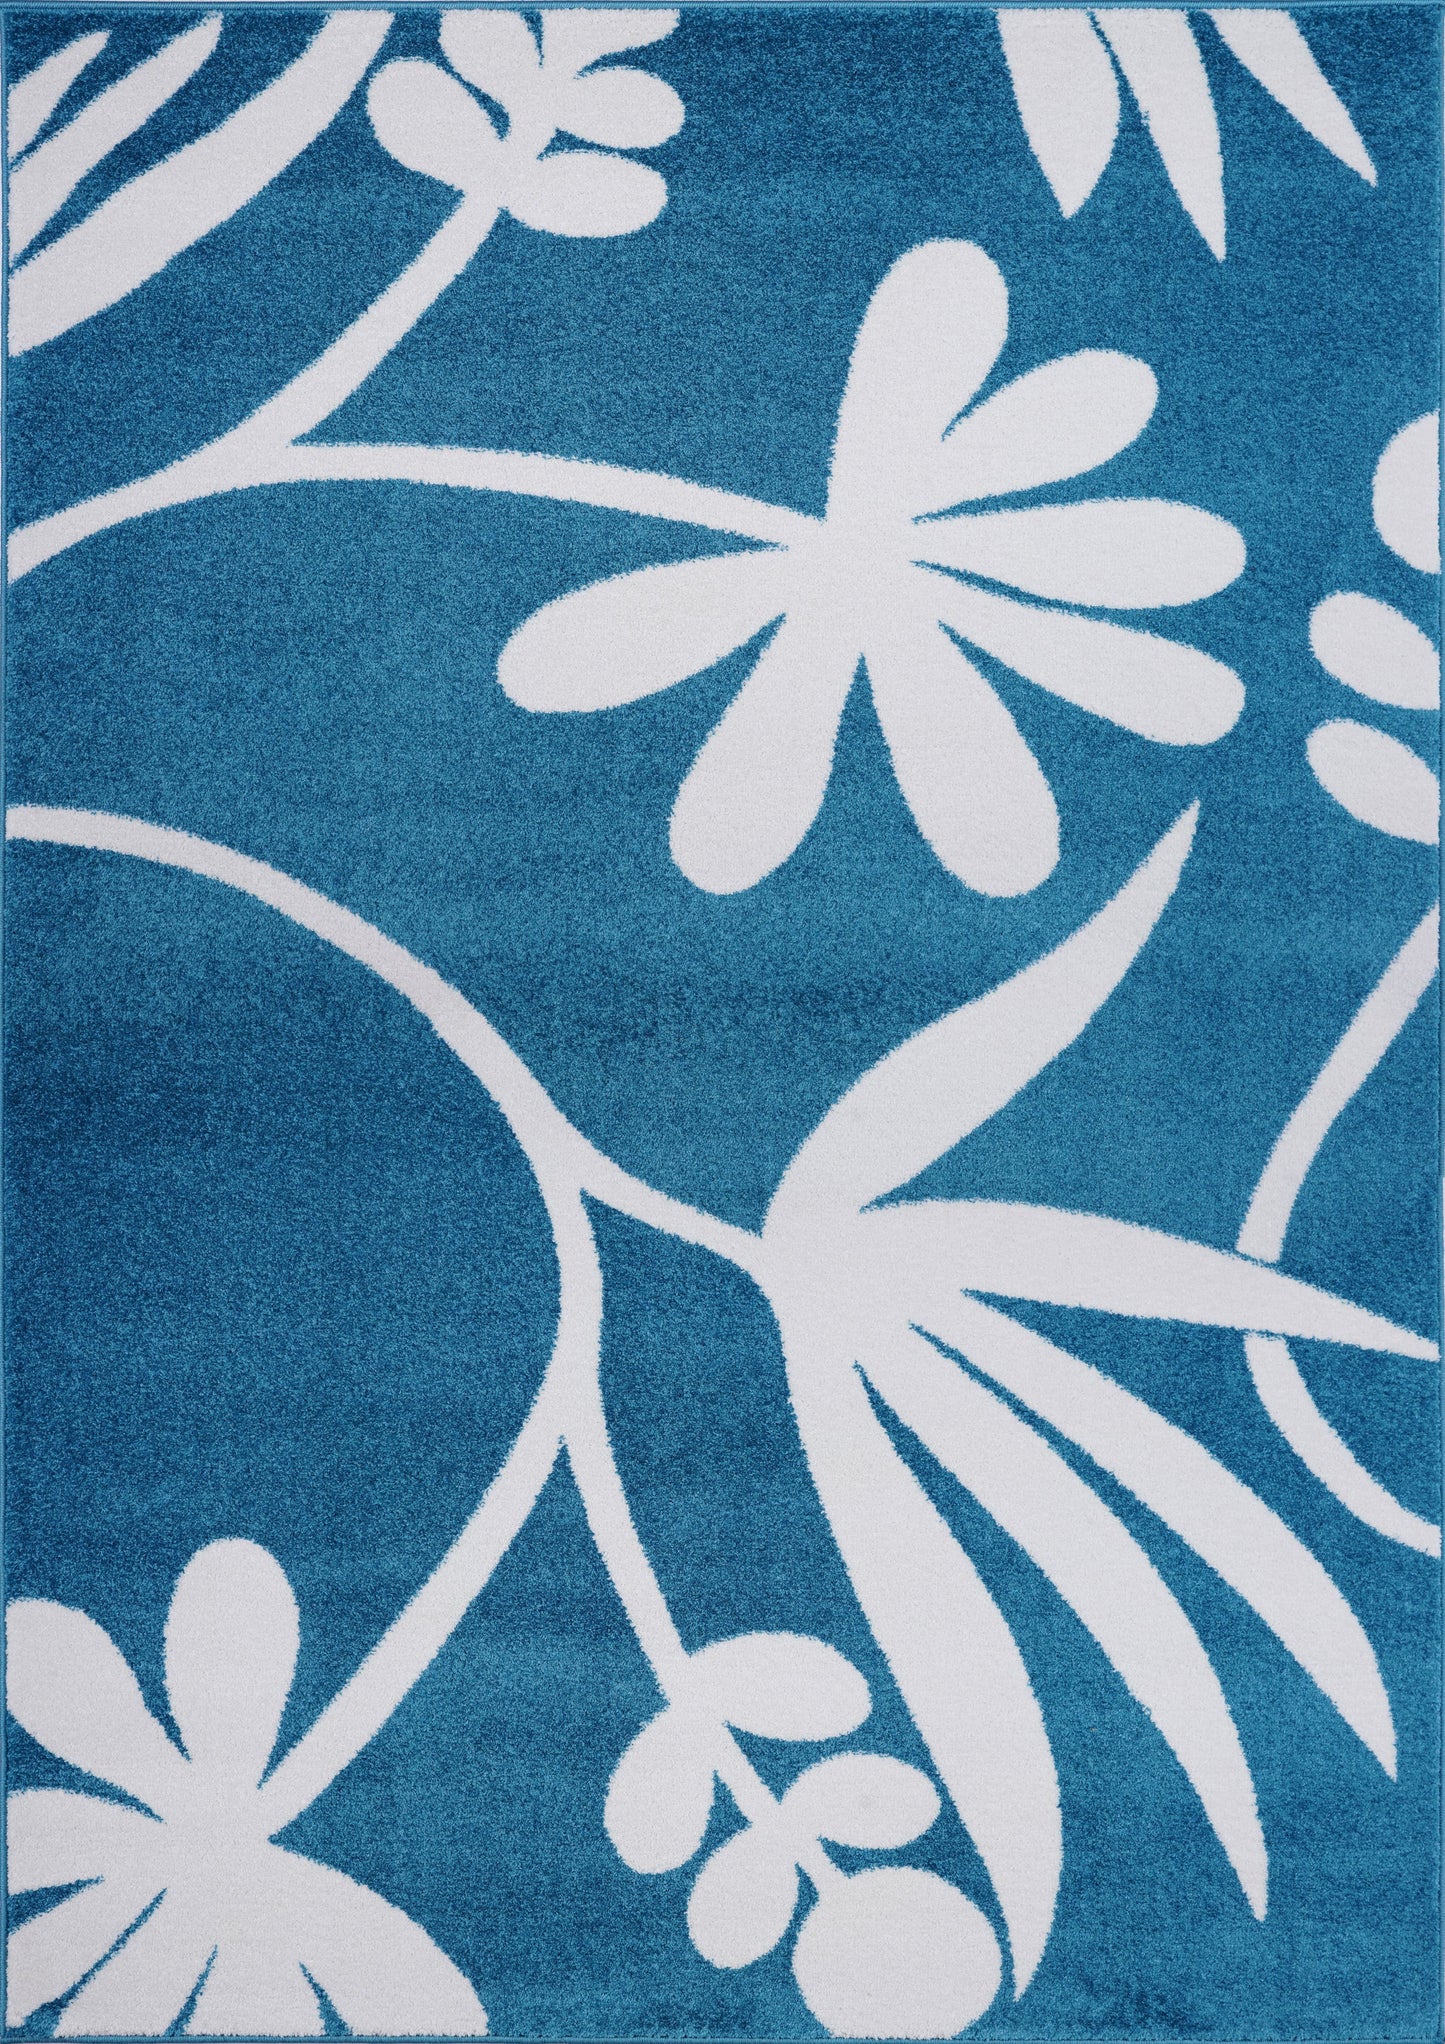 Botanical Style Simple and Creative Indoor Area Rug Carpet in Blue and Cream